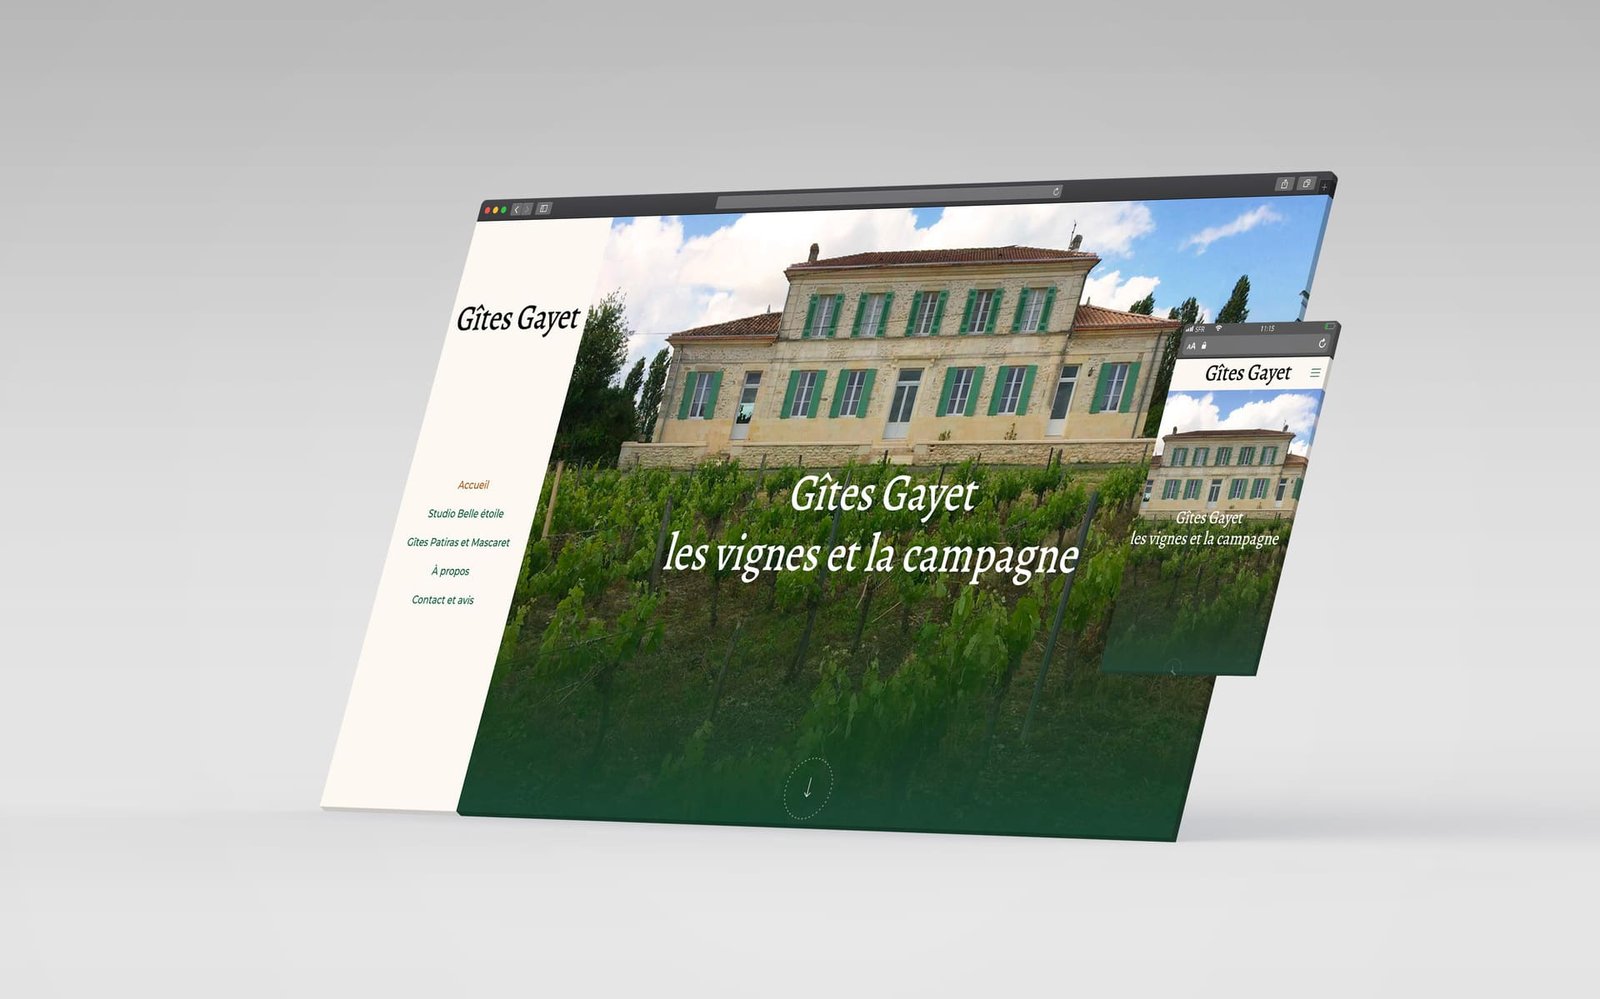 Gites Gayet home page